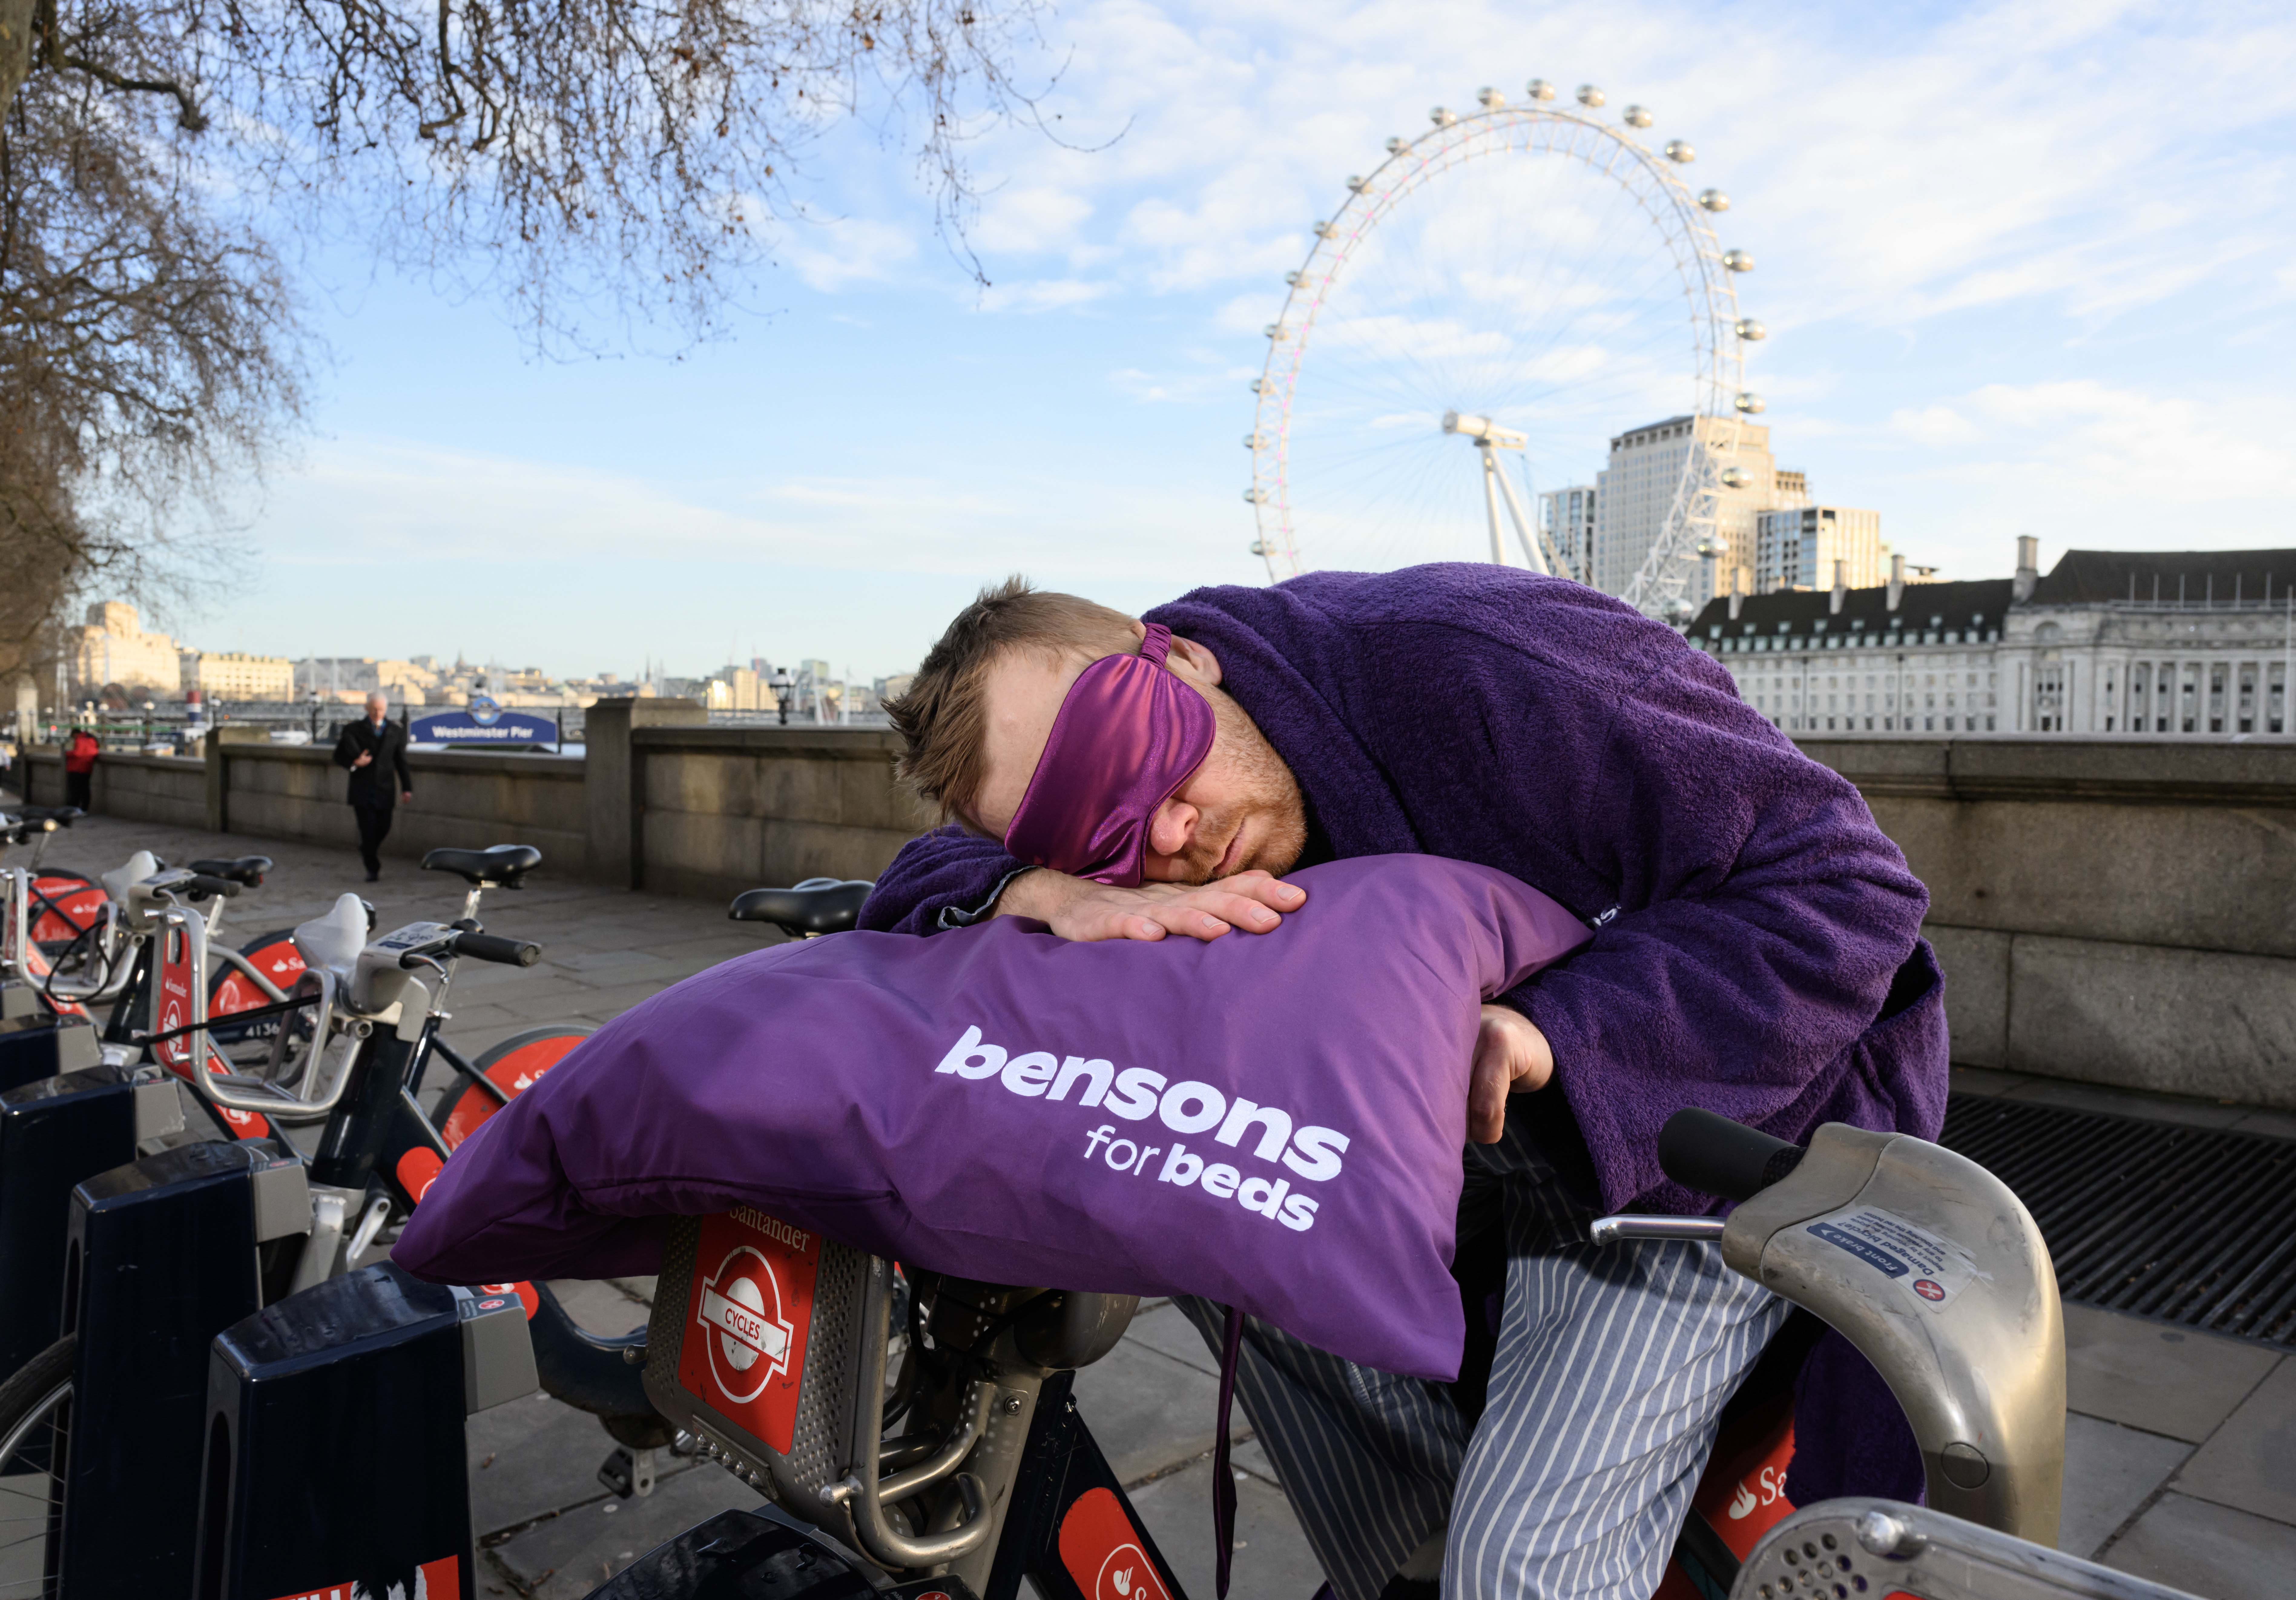 A man asleep on a parked bike for hire. He is wearing a purple dressing gown, pyjamas, and a sleep mask and in the background the London Eye is visible.